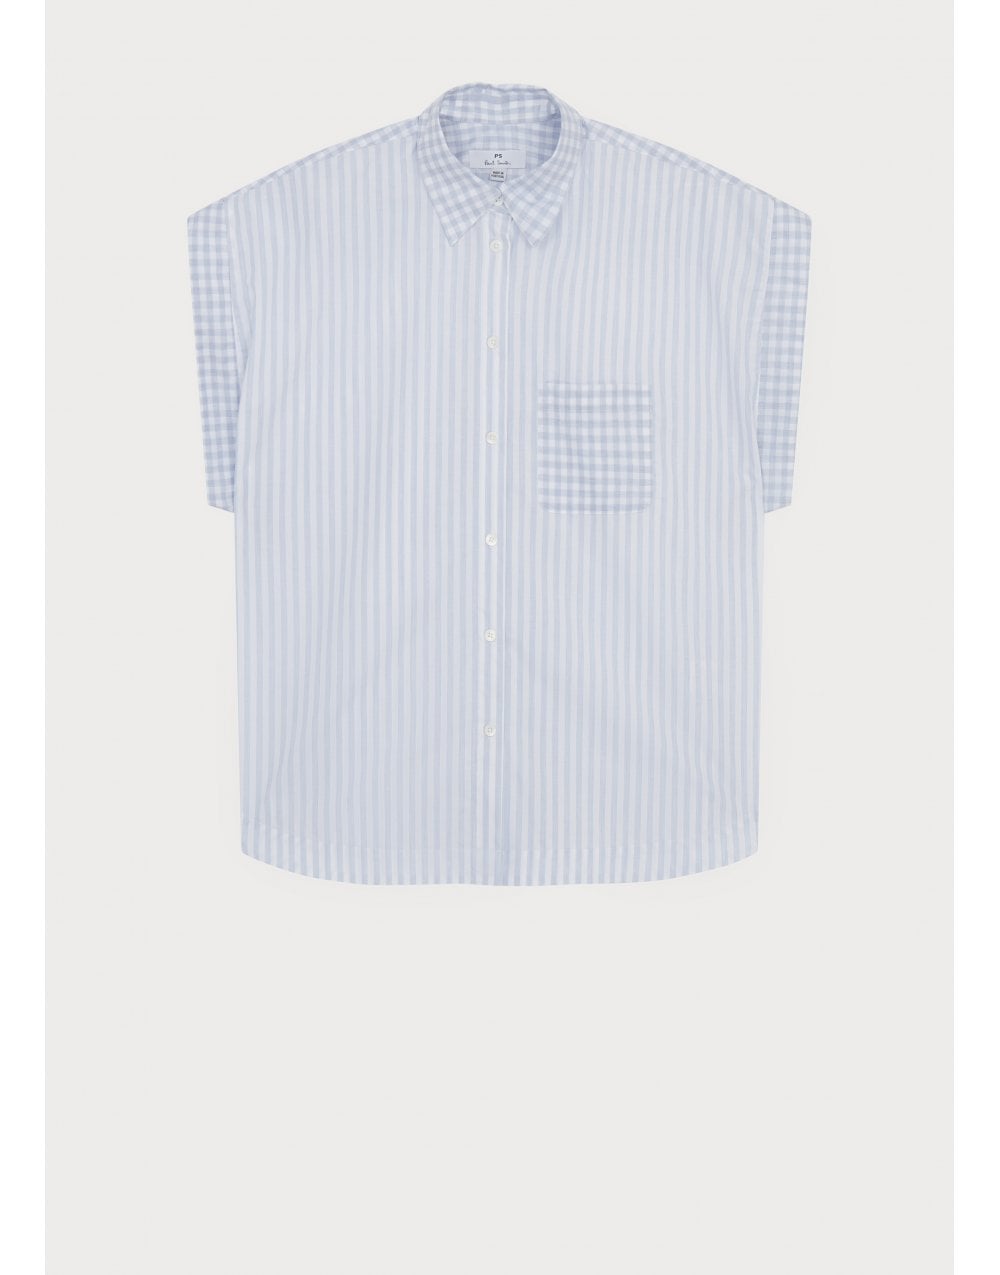 Paul Smith Paul Smith Gingham Stripe Ss Shirt Col: 01 White, Size: 8